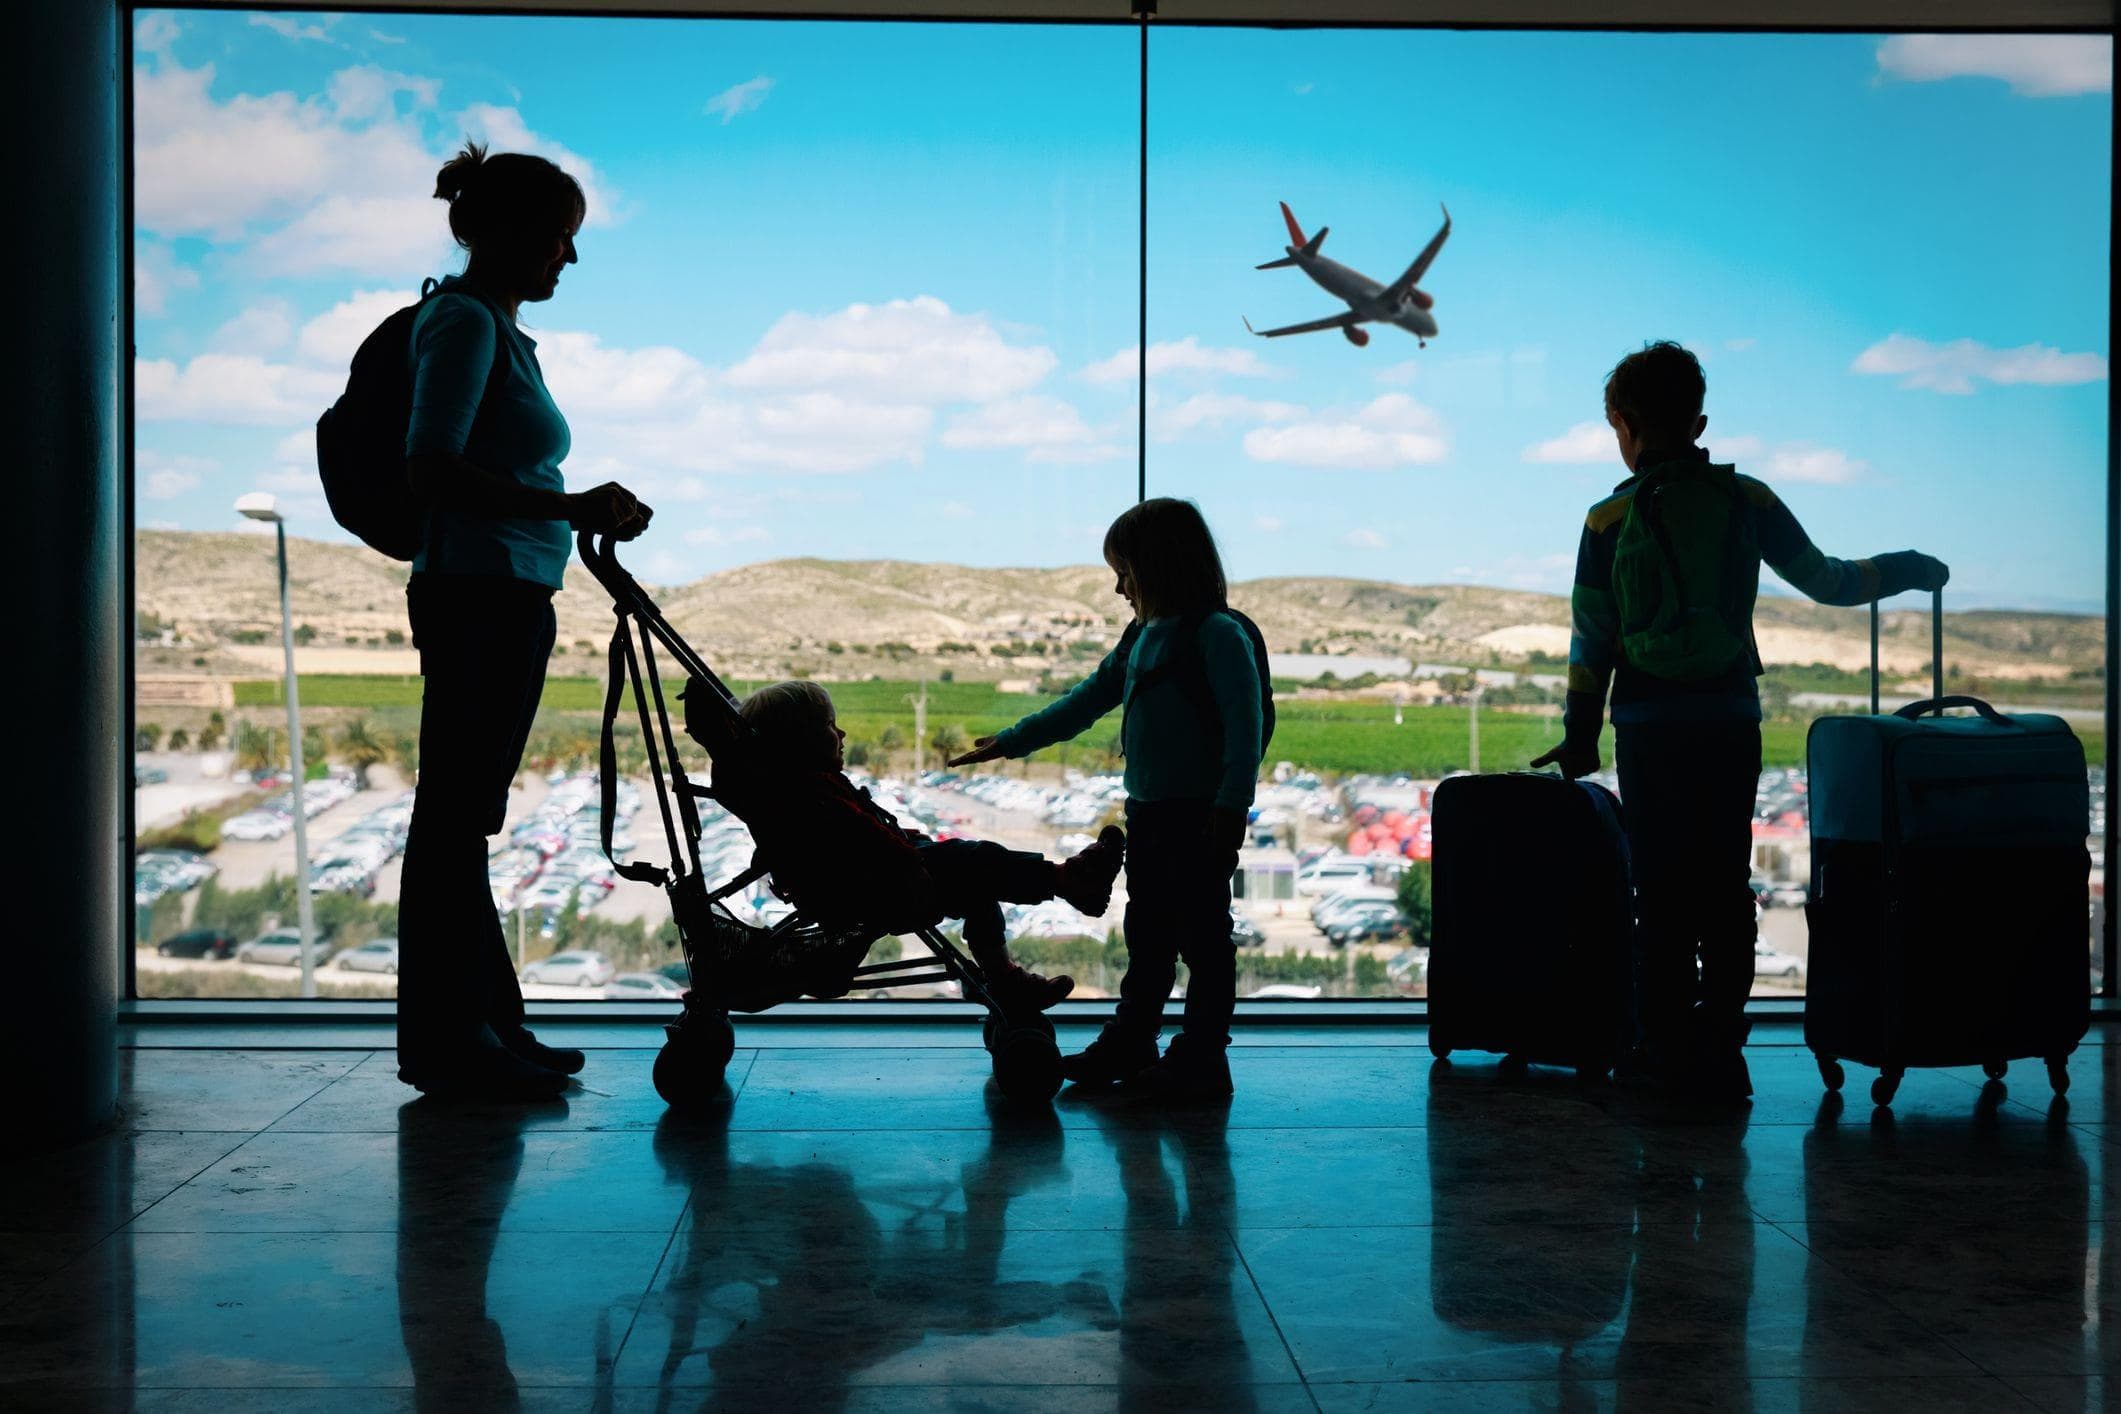 view of family waiting in airport with plane taking off in background